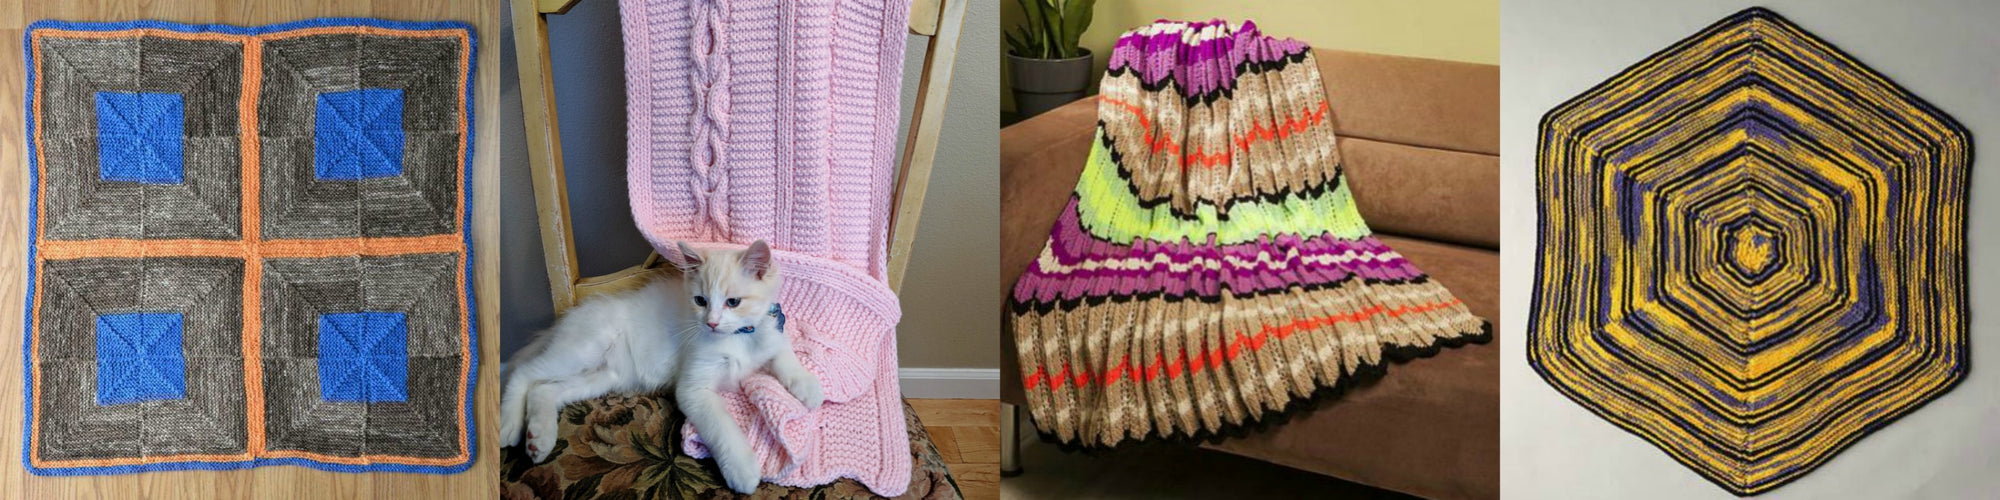 Project Linus: Donate a Handmade Blanket to a Sick Child